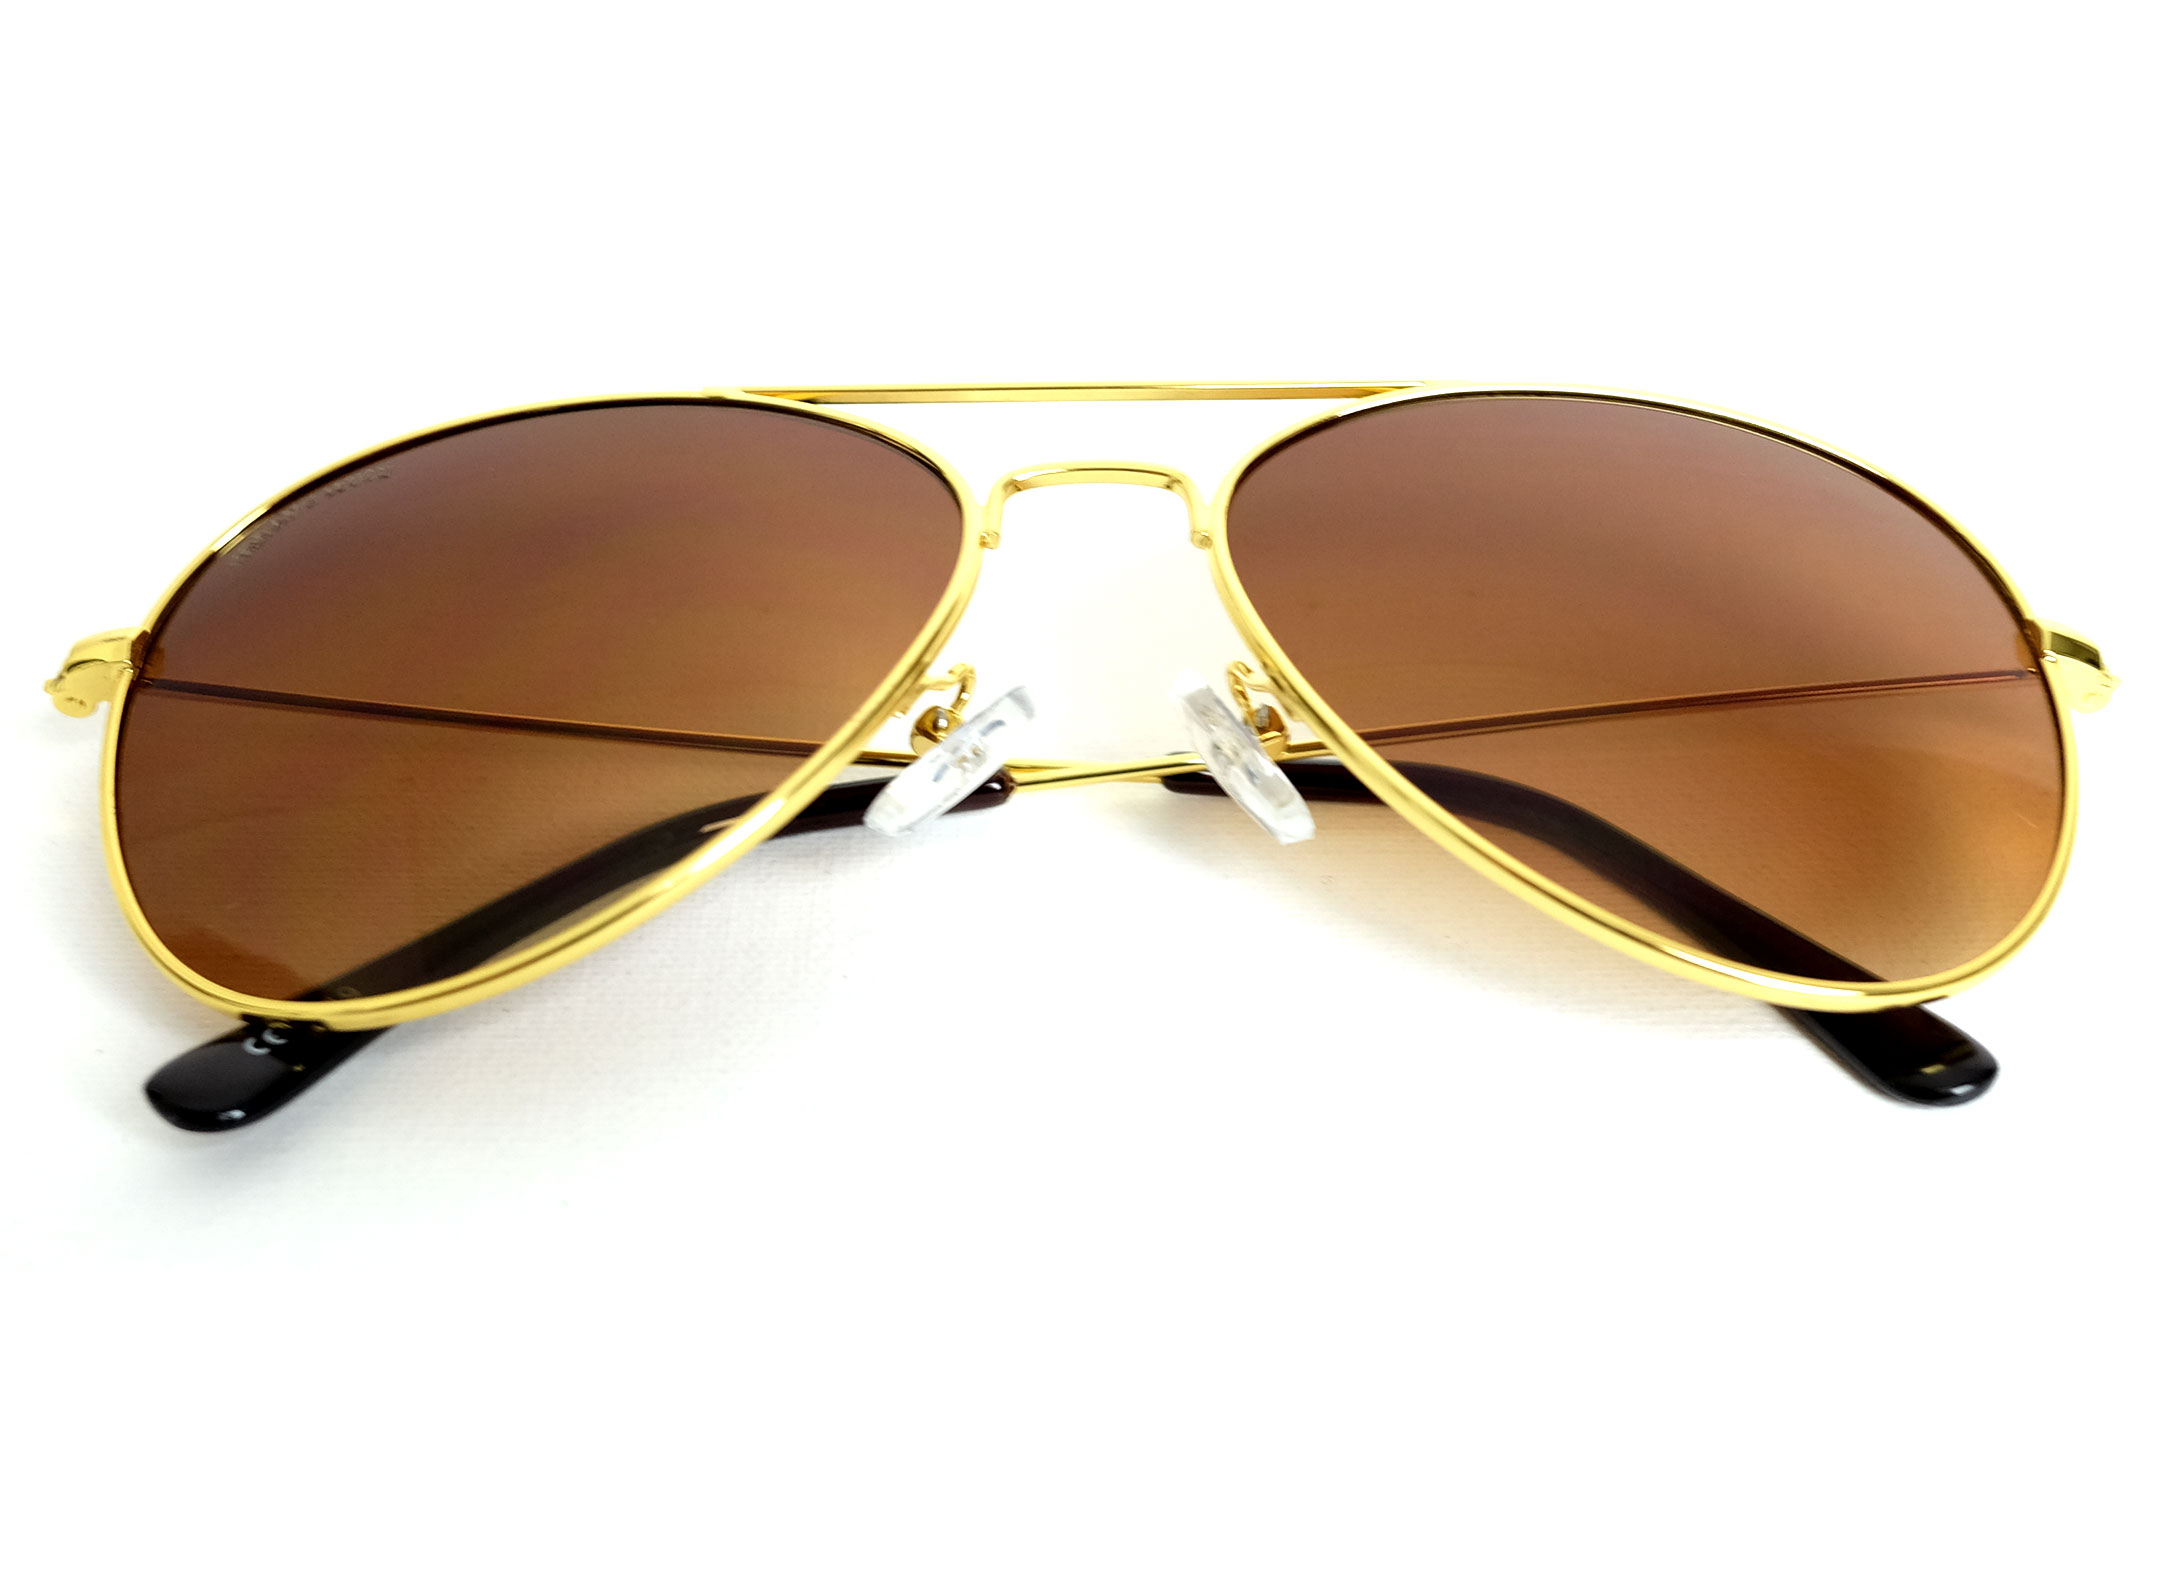 Gold Metal Frame Aviator Sunglasses with Gradient Brown - URBANE MUSE CHRIS  SMITH®